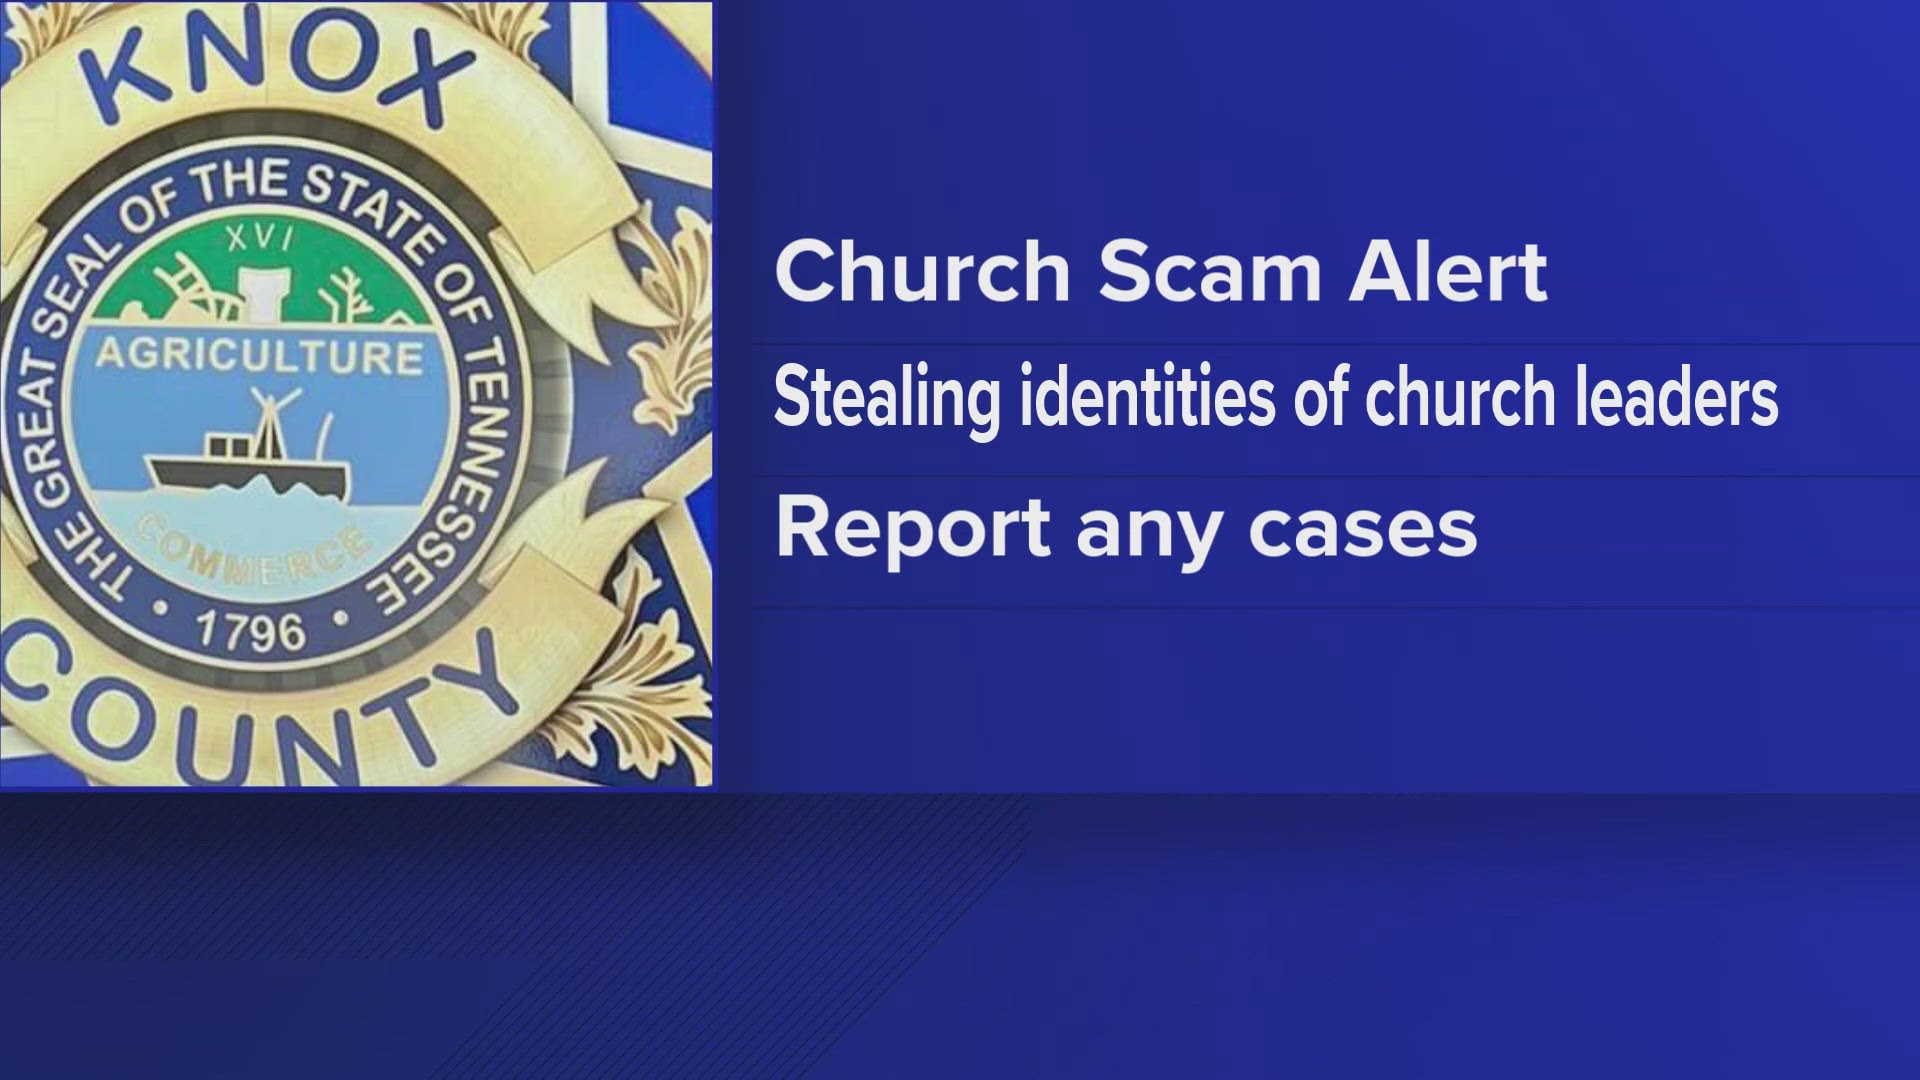 The Knox County Sheriff's Office said scammers are asking church personnel and church members to send gift card information to give to people in need.